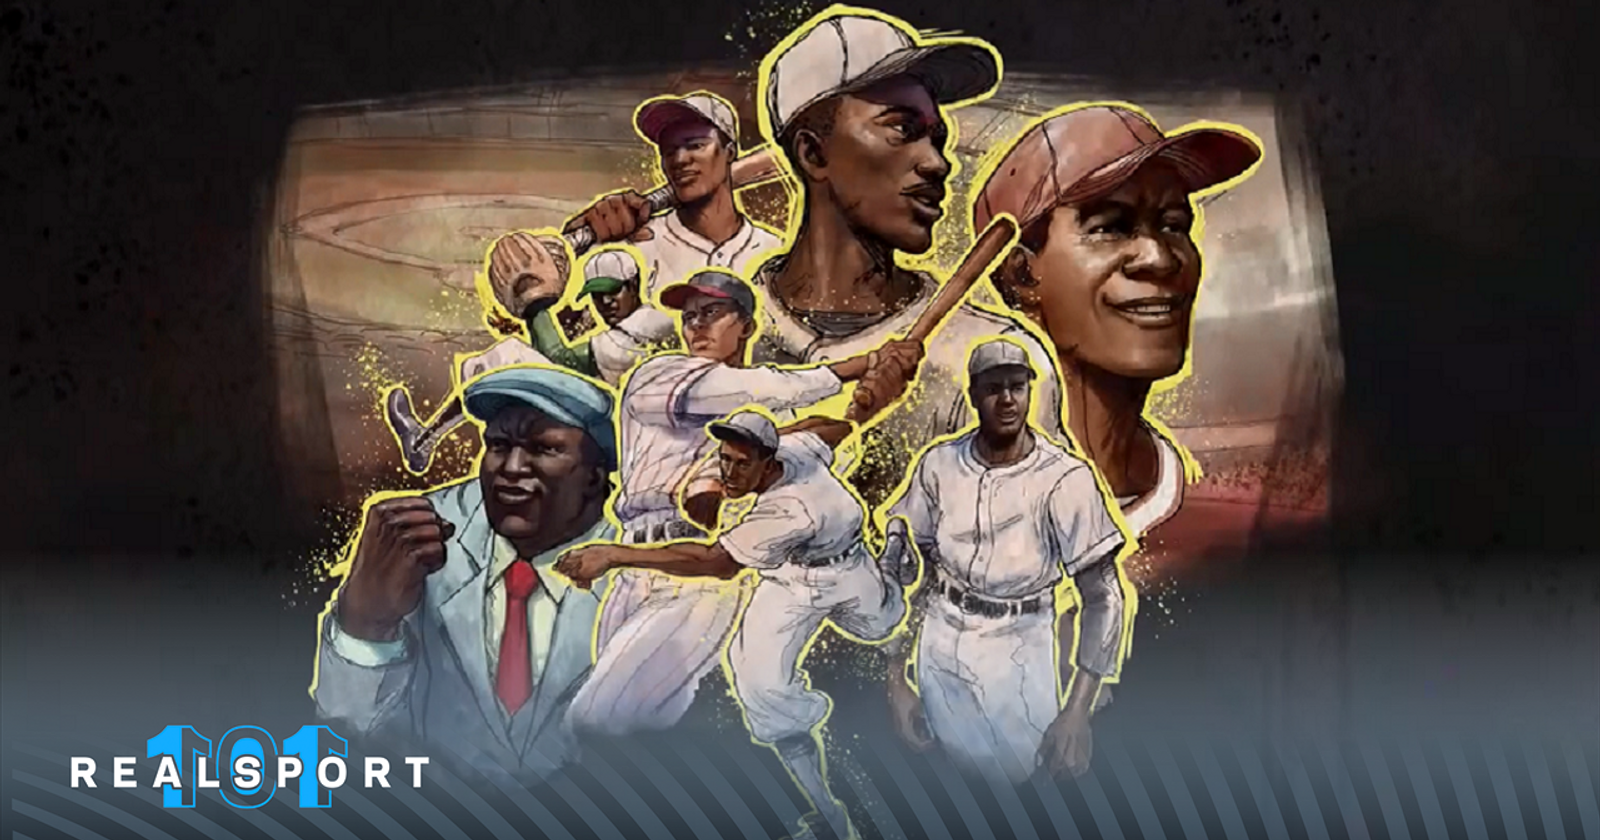 MLB The Show 23's Storylines mode tells the Negro Leagues